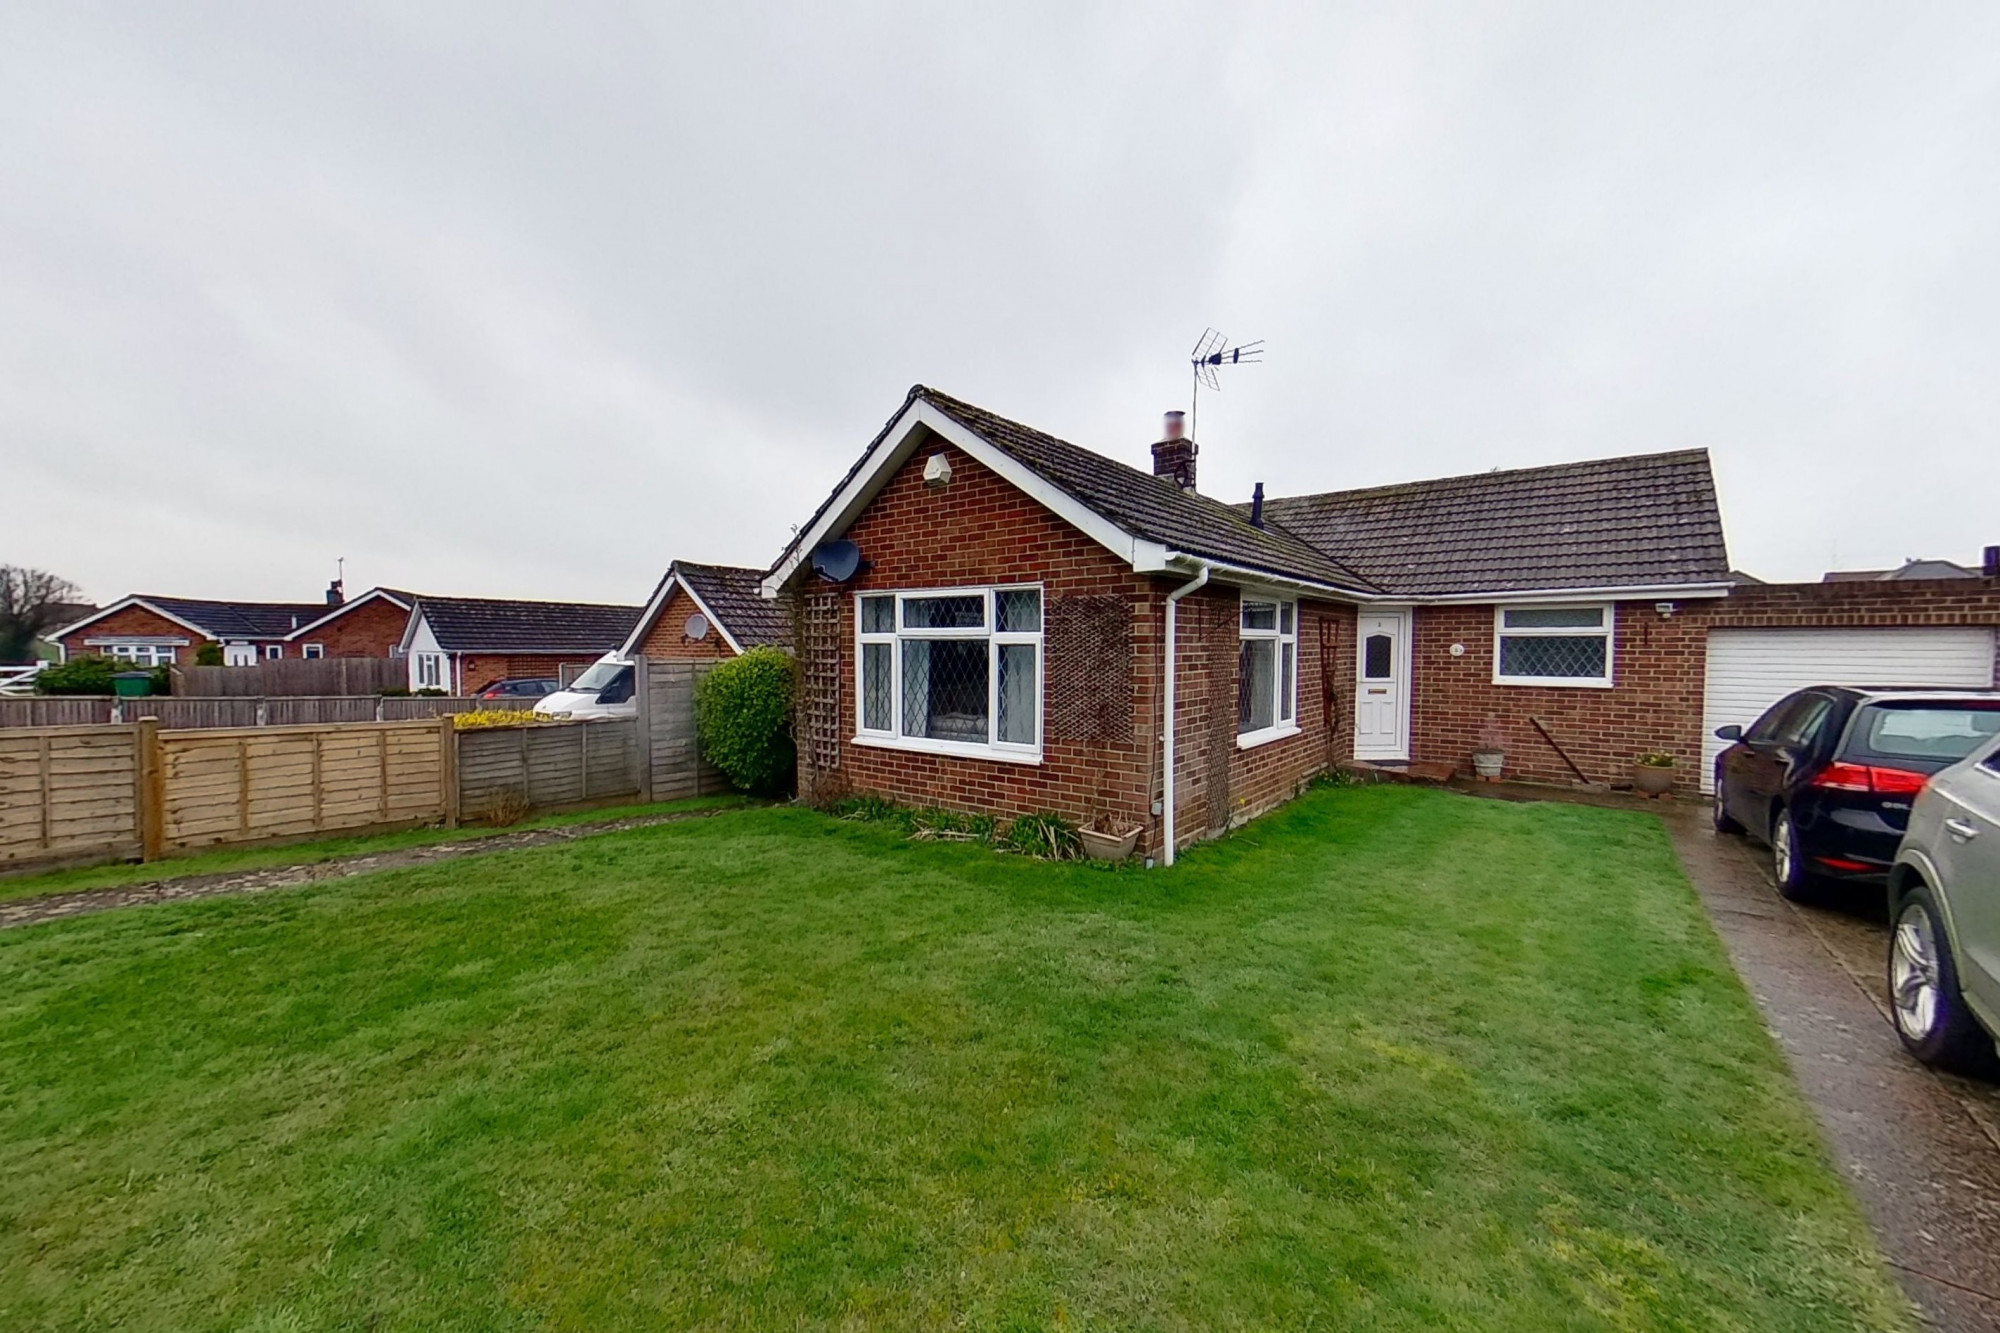 2 bed bungalow for sale in Barrow Hill Rise.